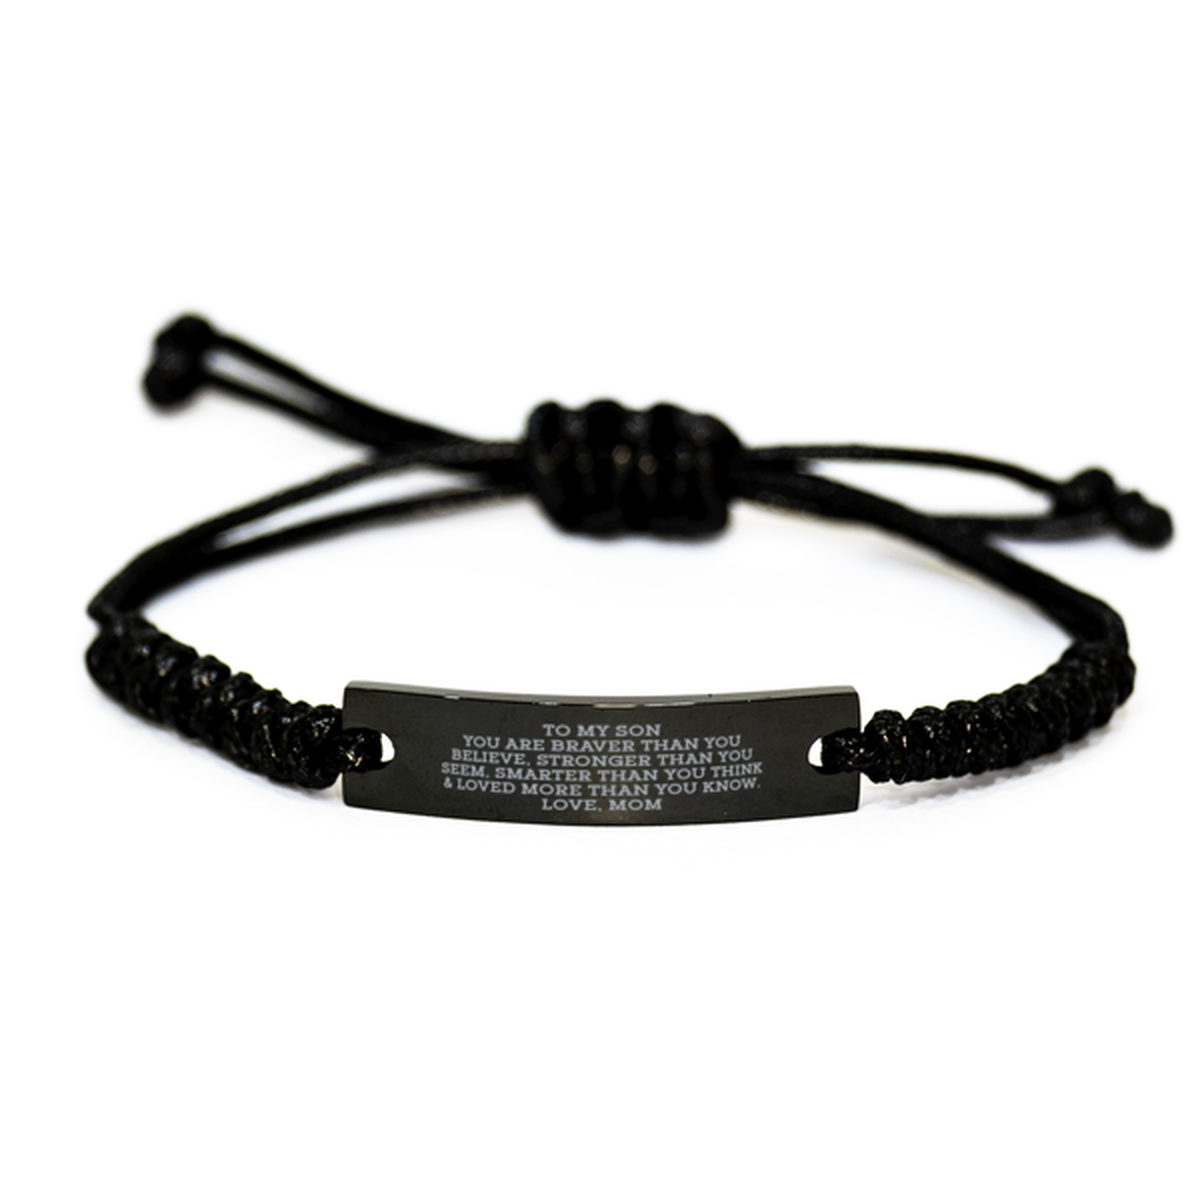 To My Son Rope Bracelet, You Are Braver Than You Believe, Graduation Day Gifts For Son From Mom, Birthday Gifts For Men